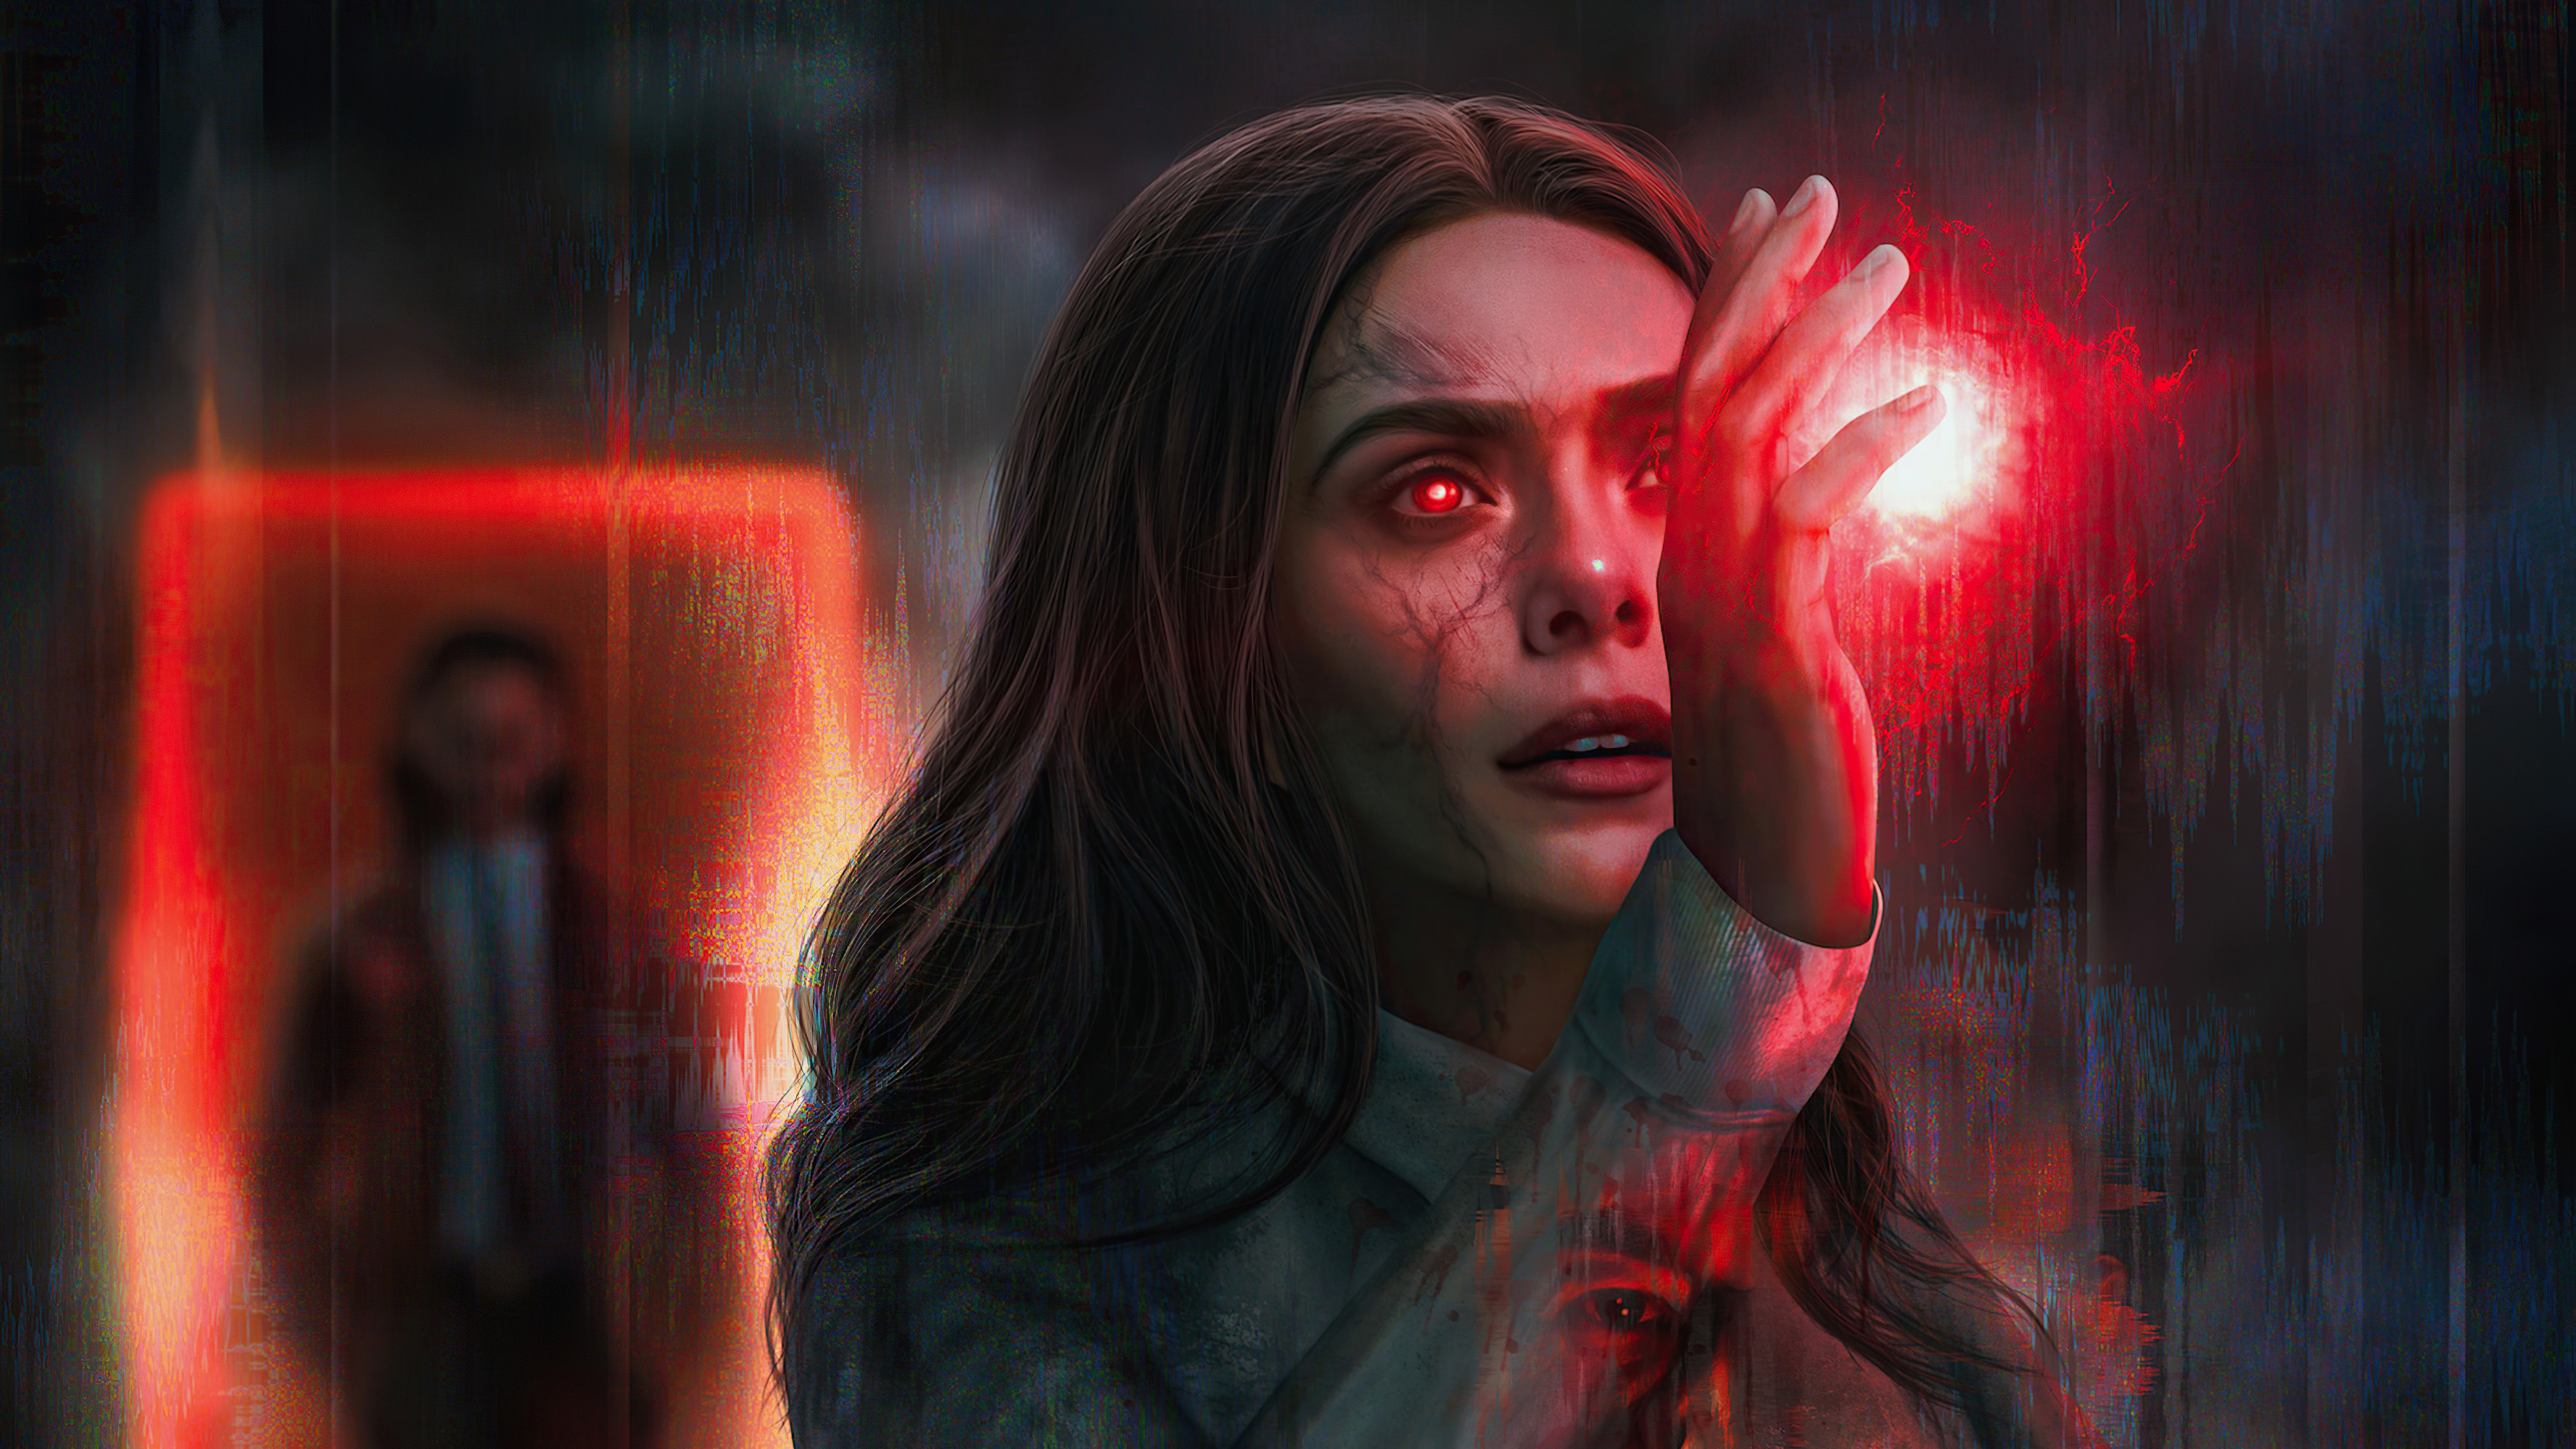 Wanda Scarlet Witch 5k Ultra HD ID 7074 iPhone Wallpapers Free Download